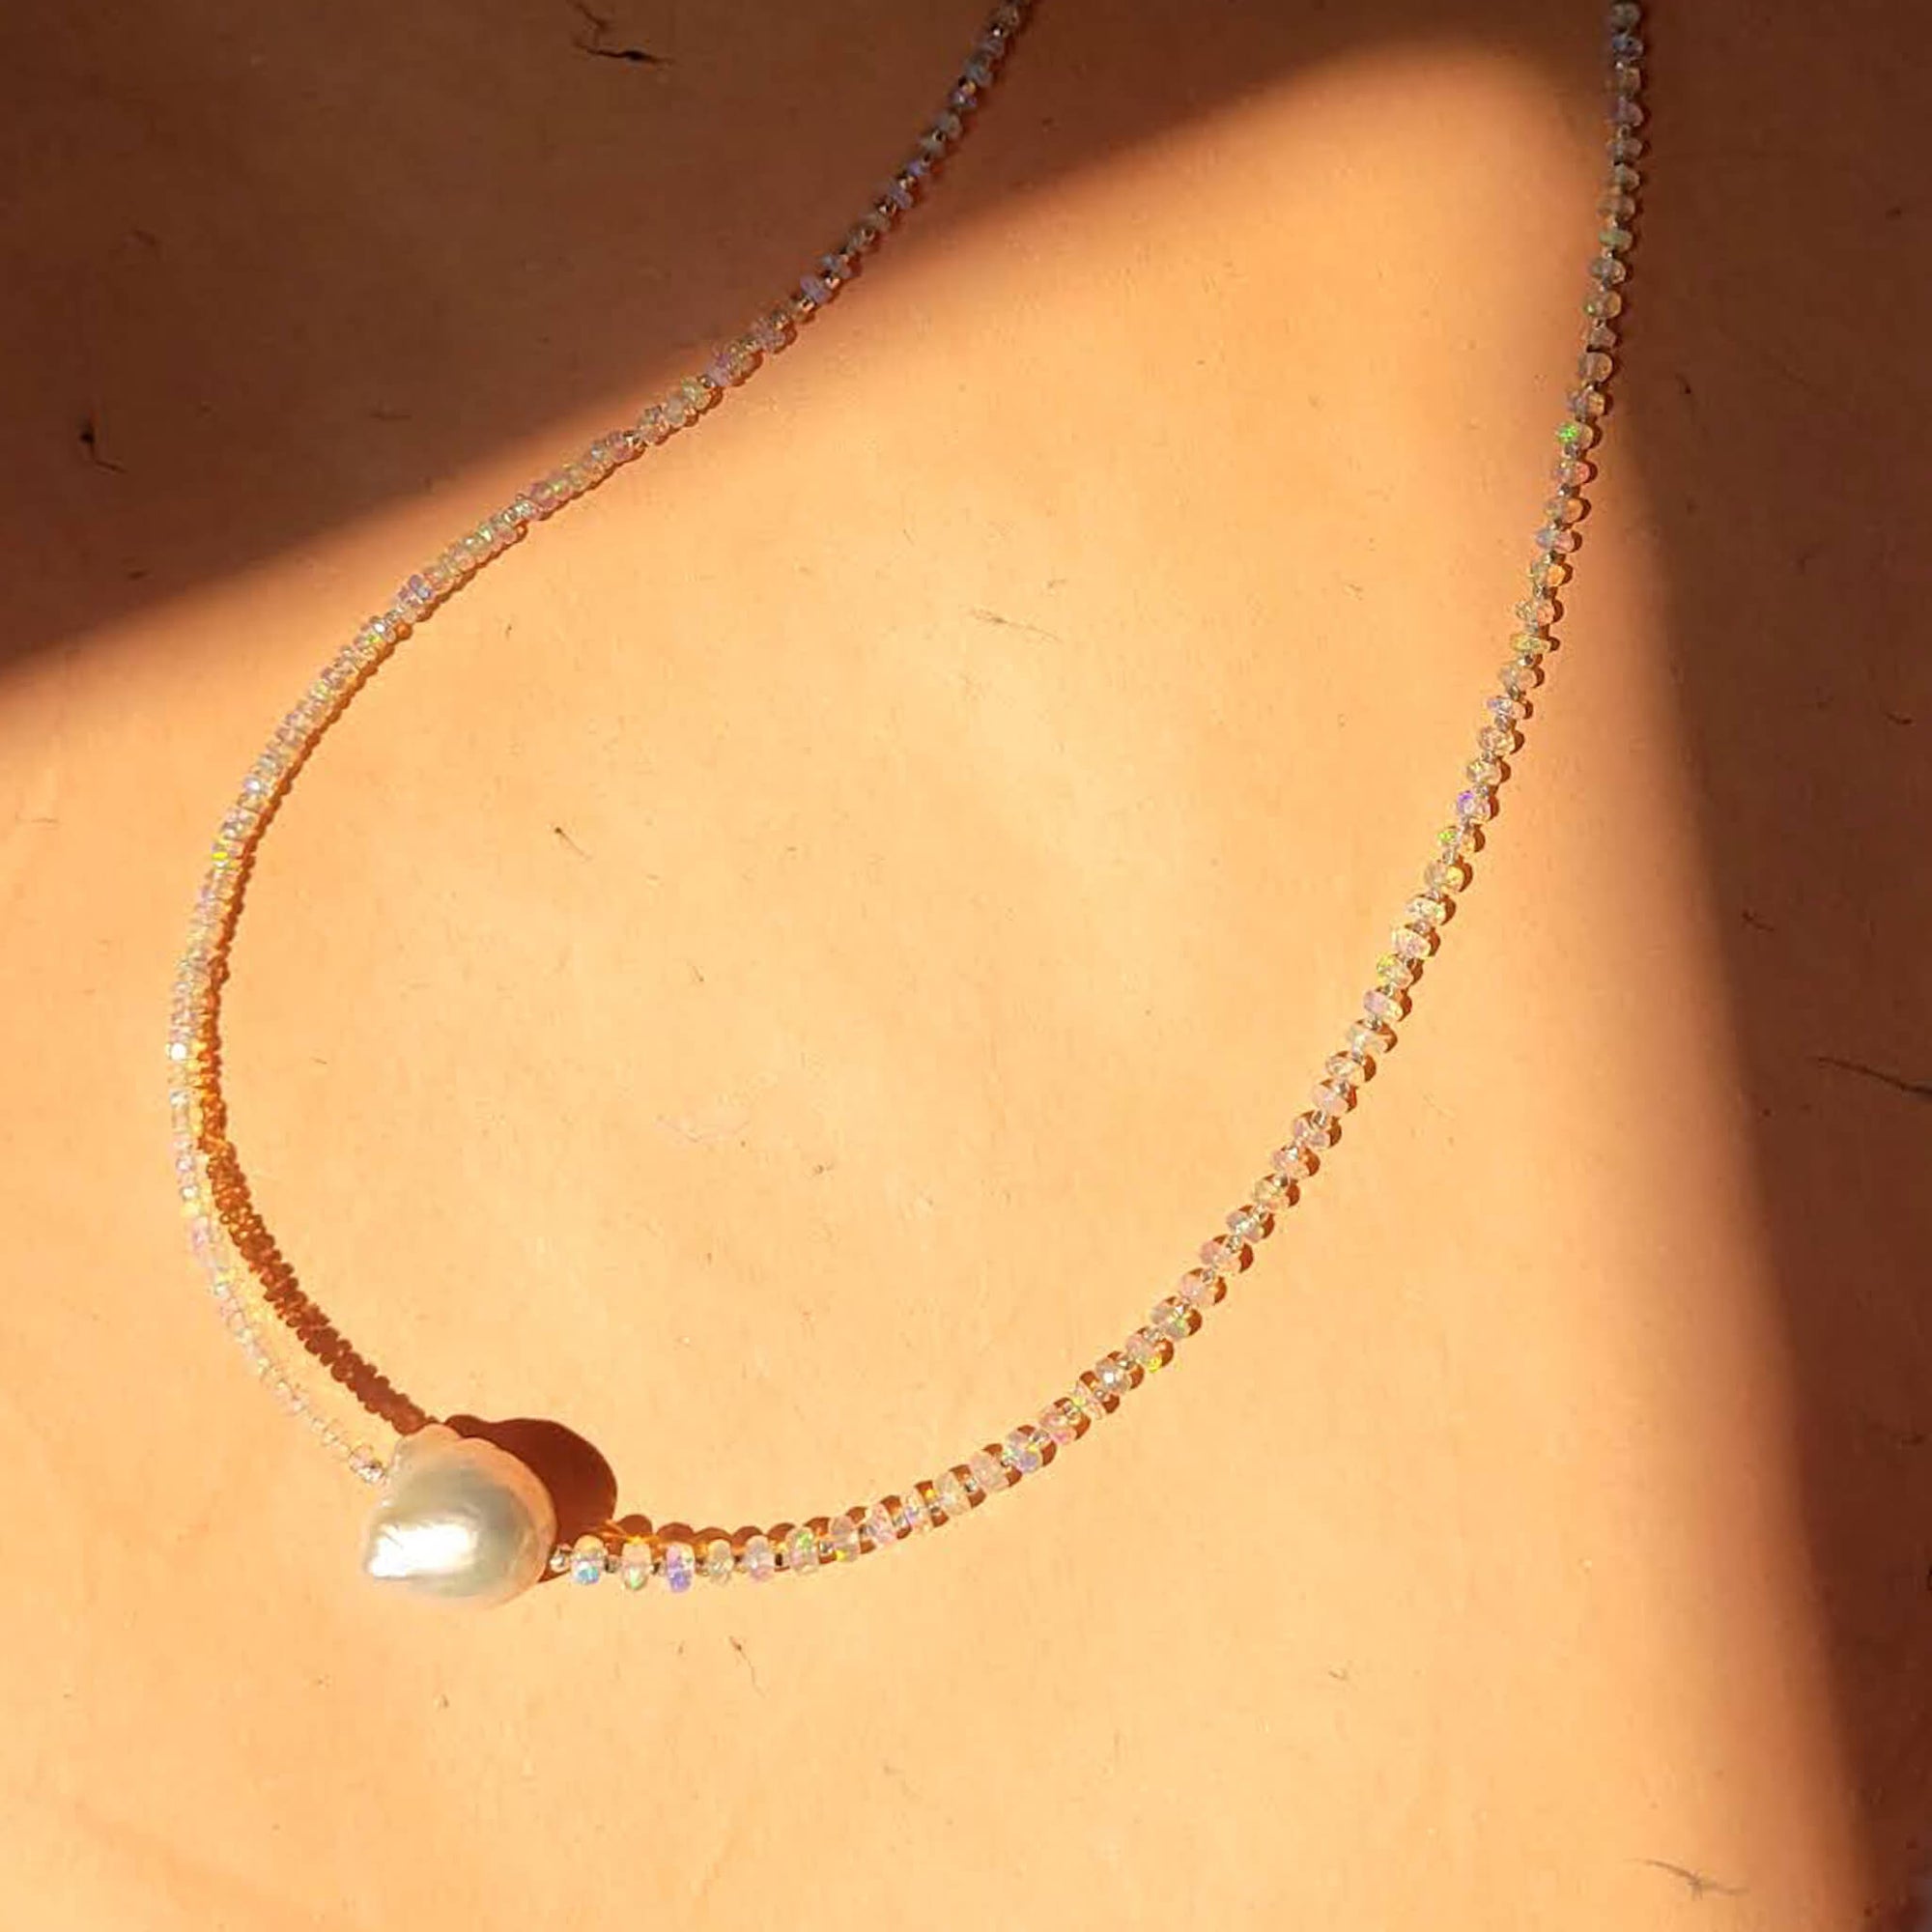 Iridescent Opal and Silver Necklace with a Baroque Pearl Center